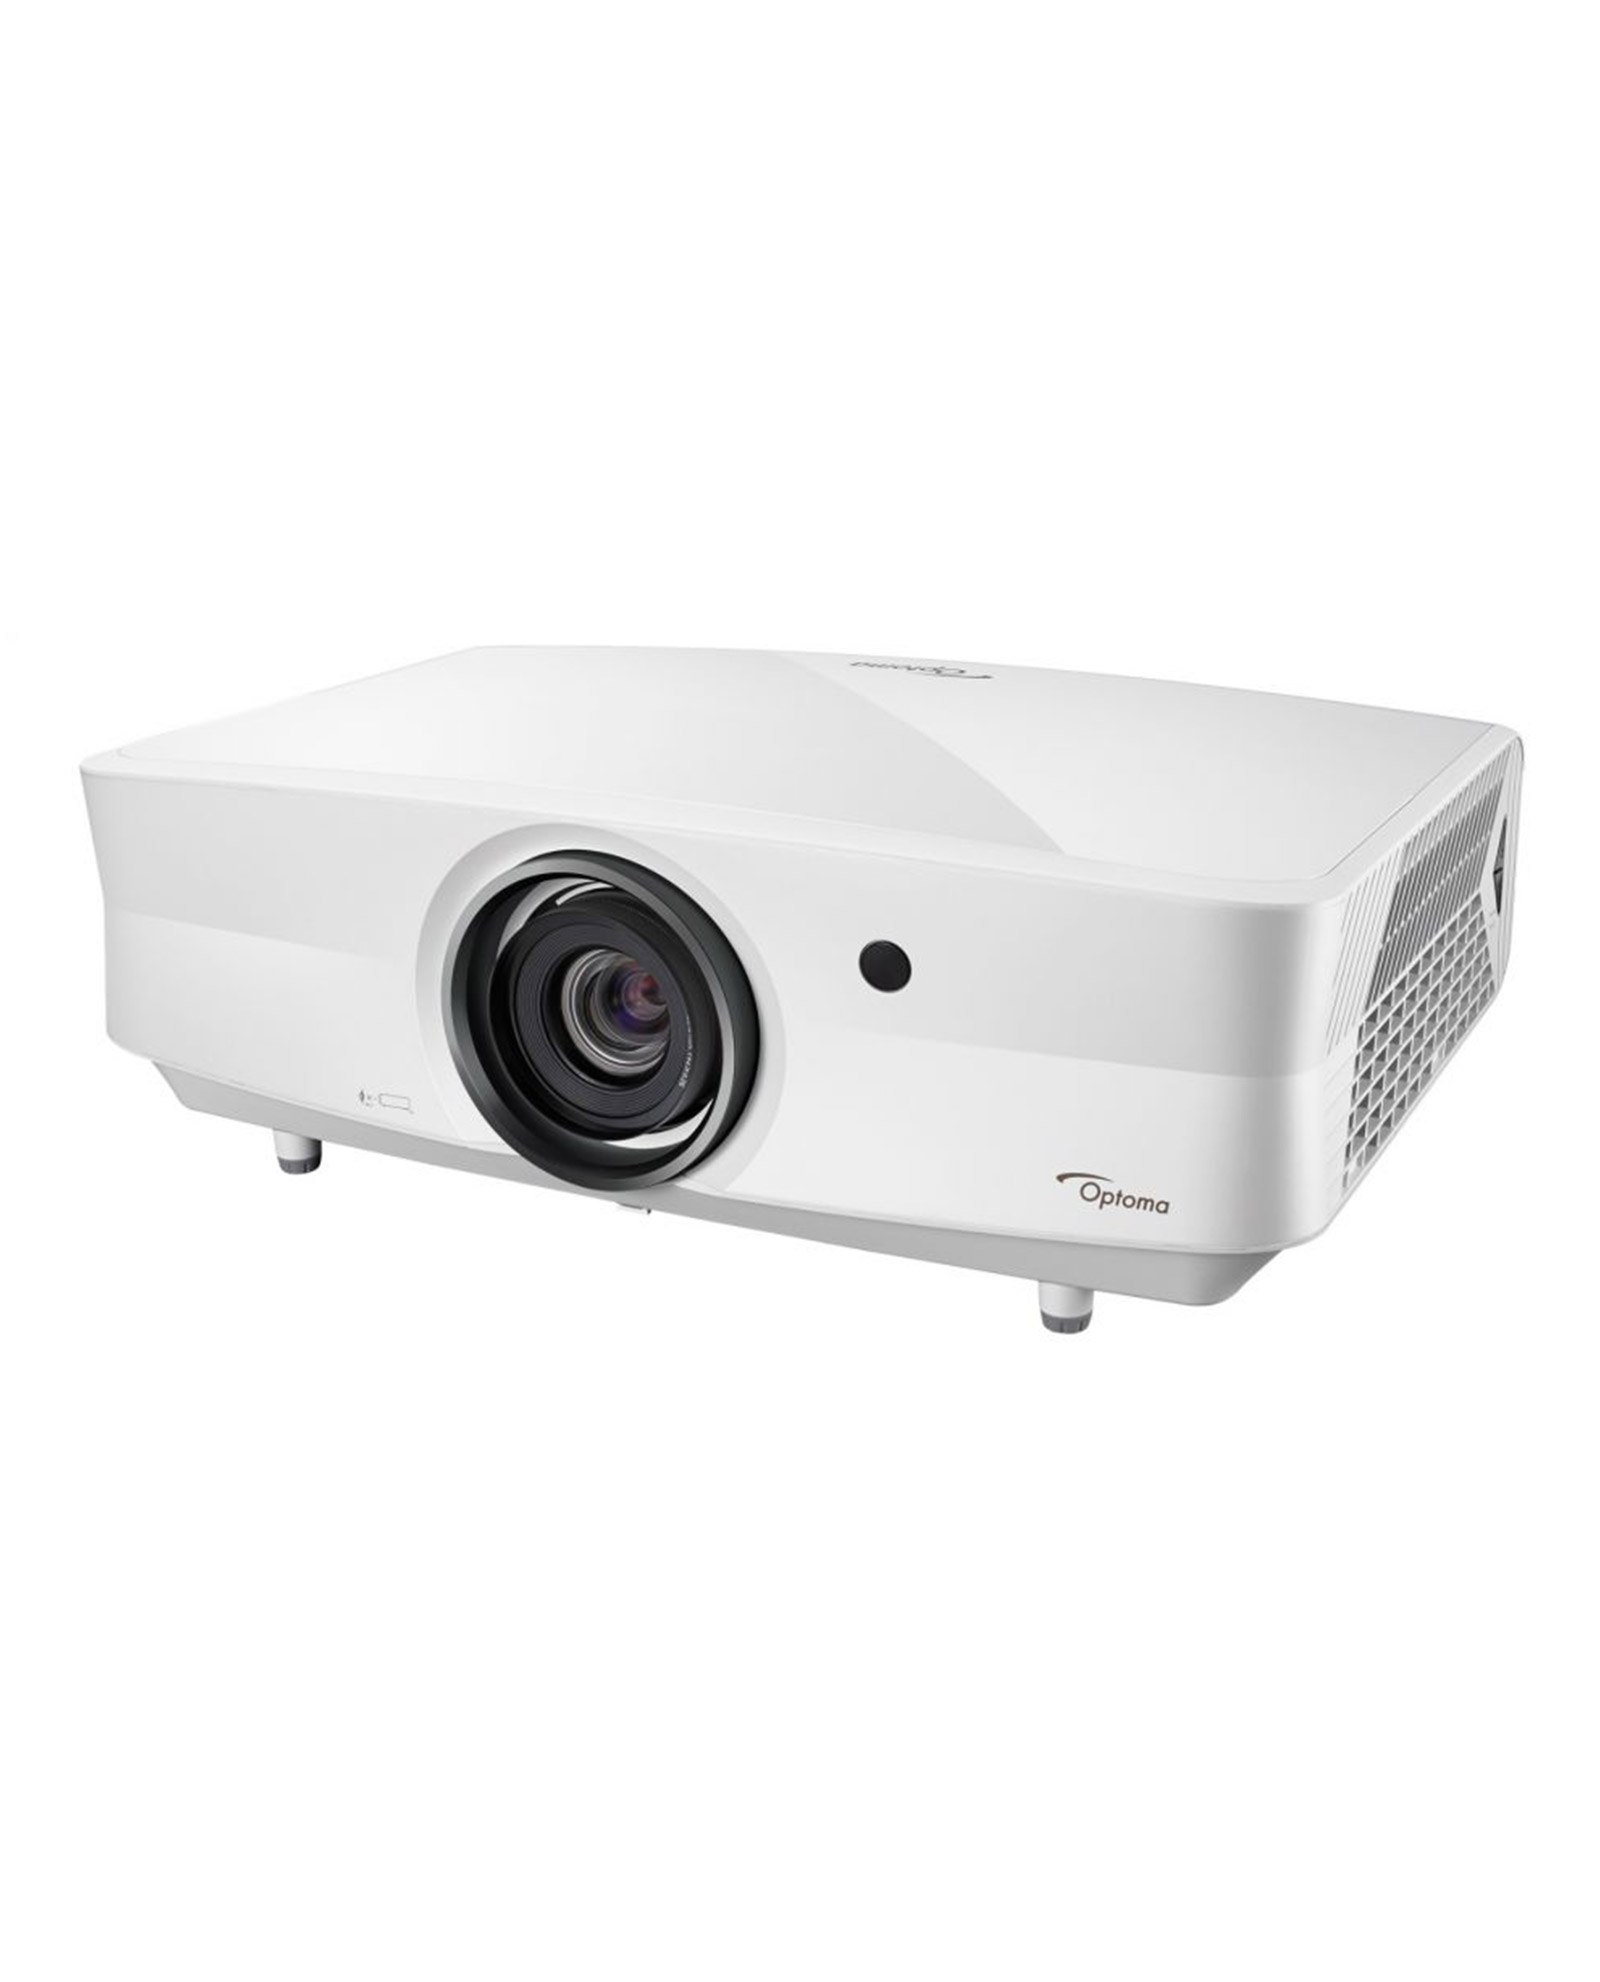 Optoma Uhd65lv 4k Udh Hdr Laser Home Theatre Projector 2